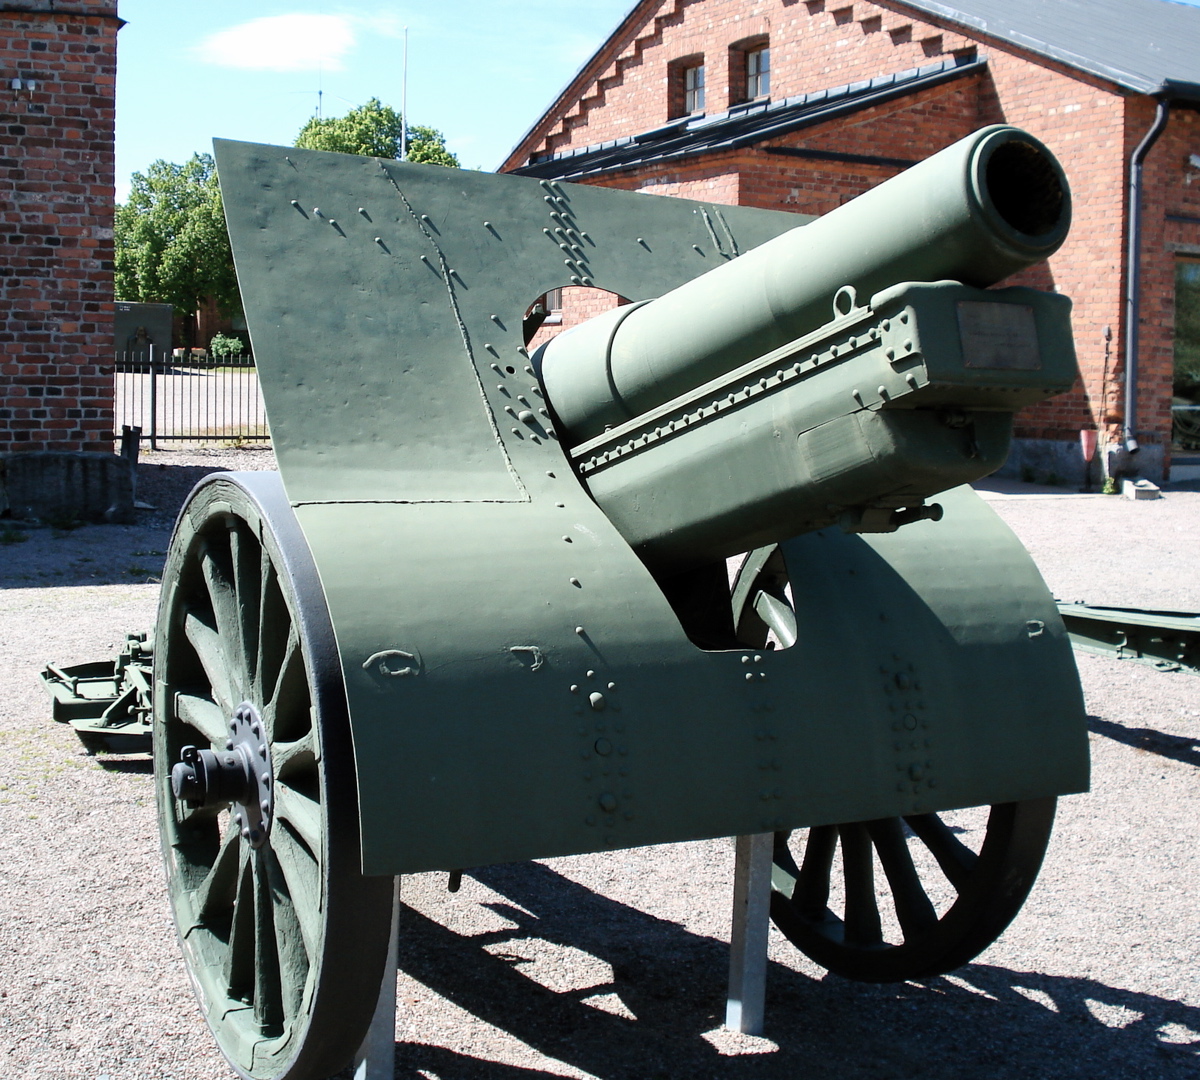 http://dic.academic.ru/pictures/wiki/files/49/152mm_m09-30_fortress_howitzer_schneider_01.jpg